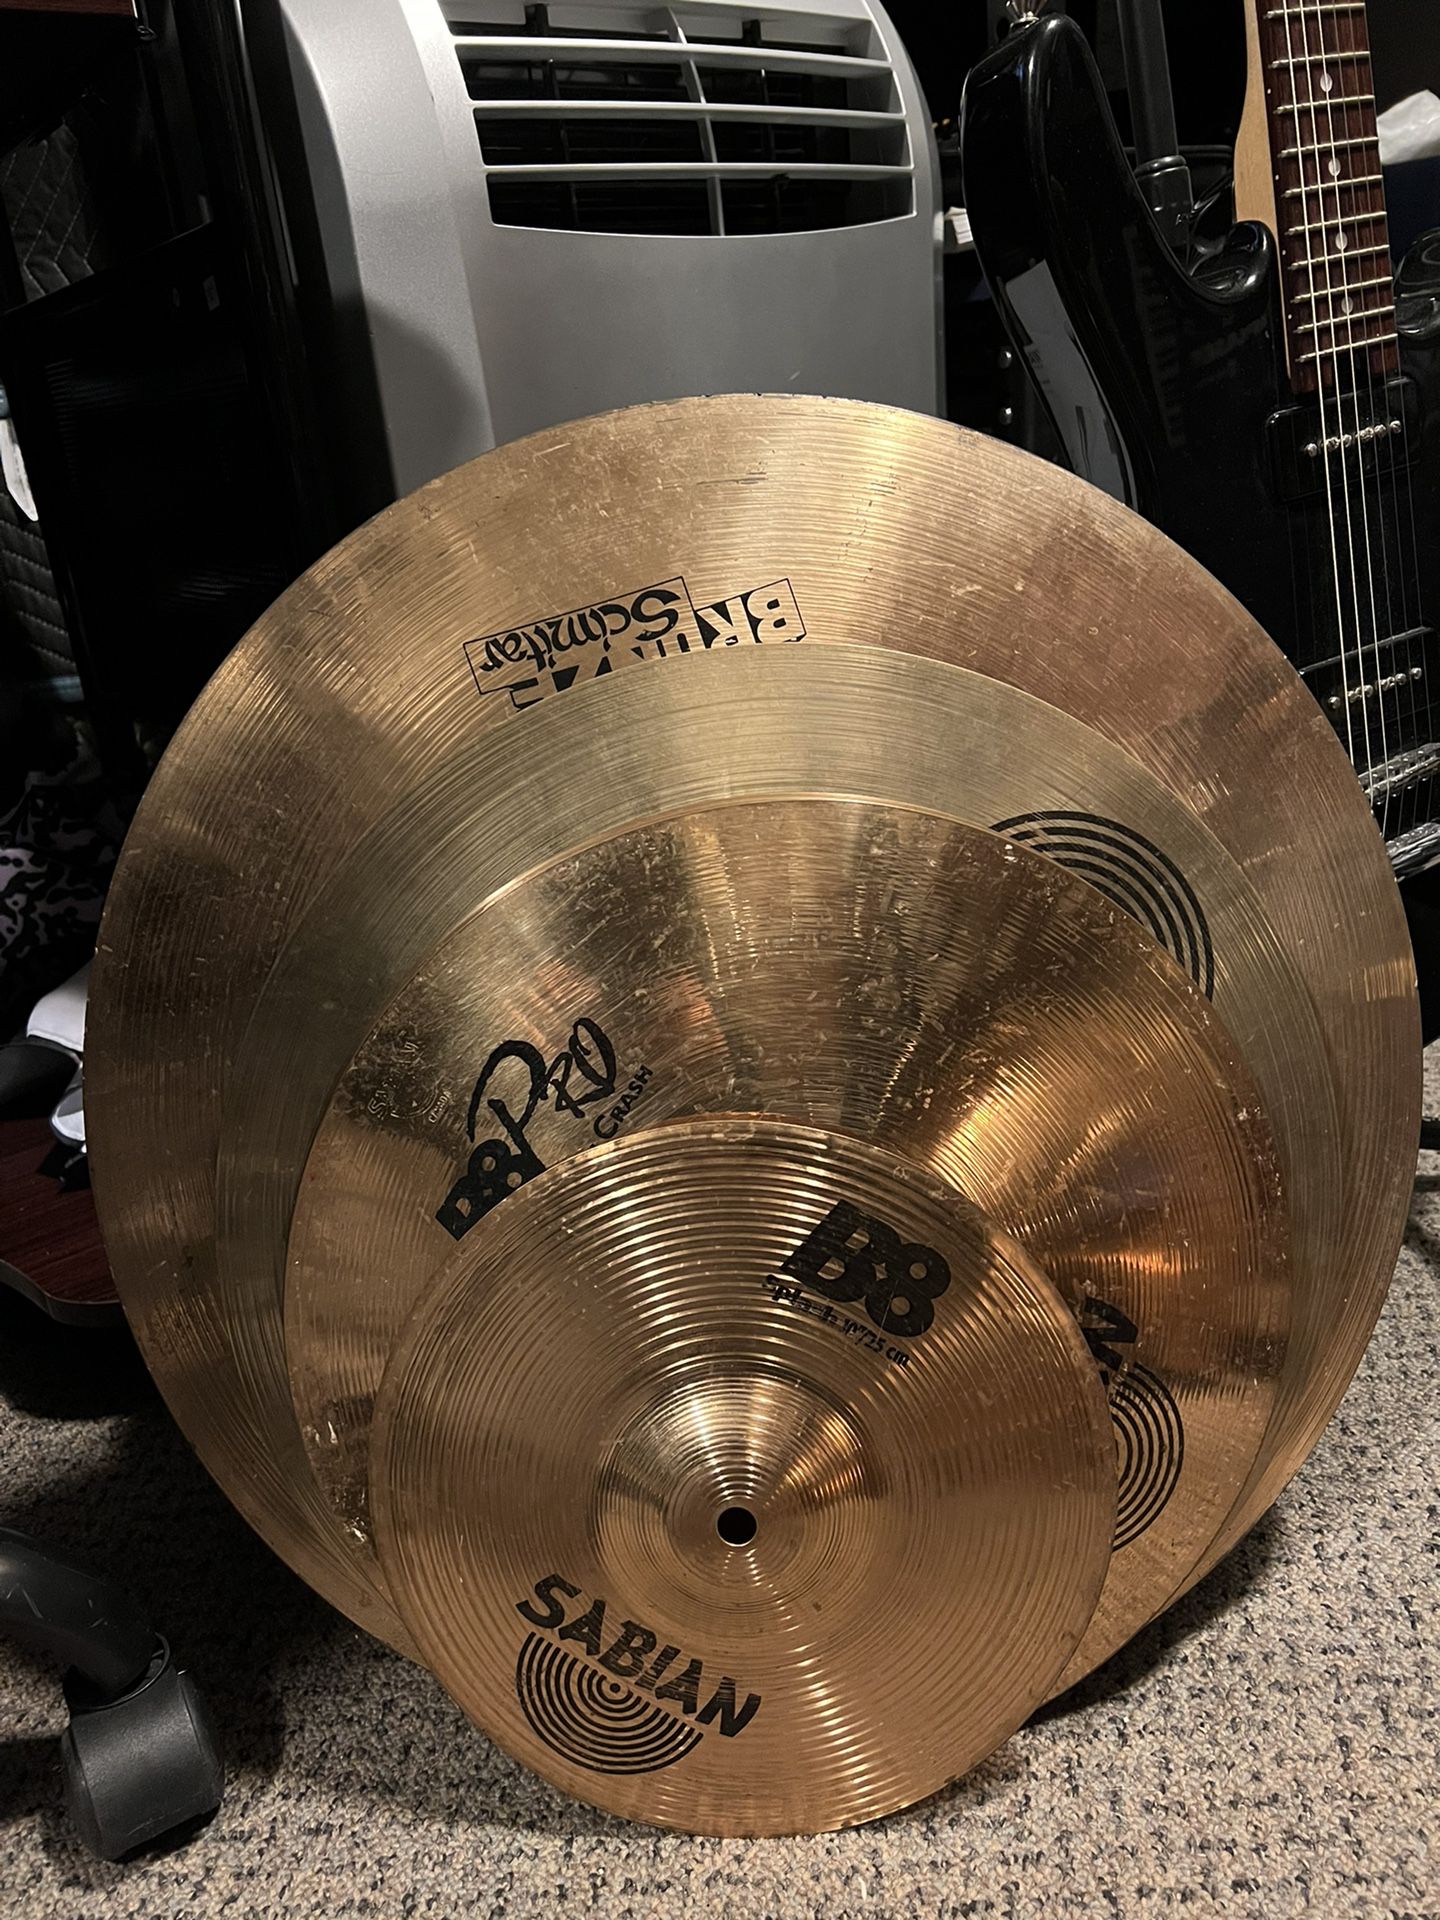 Lot of Entry Level/Practice Cymbals